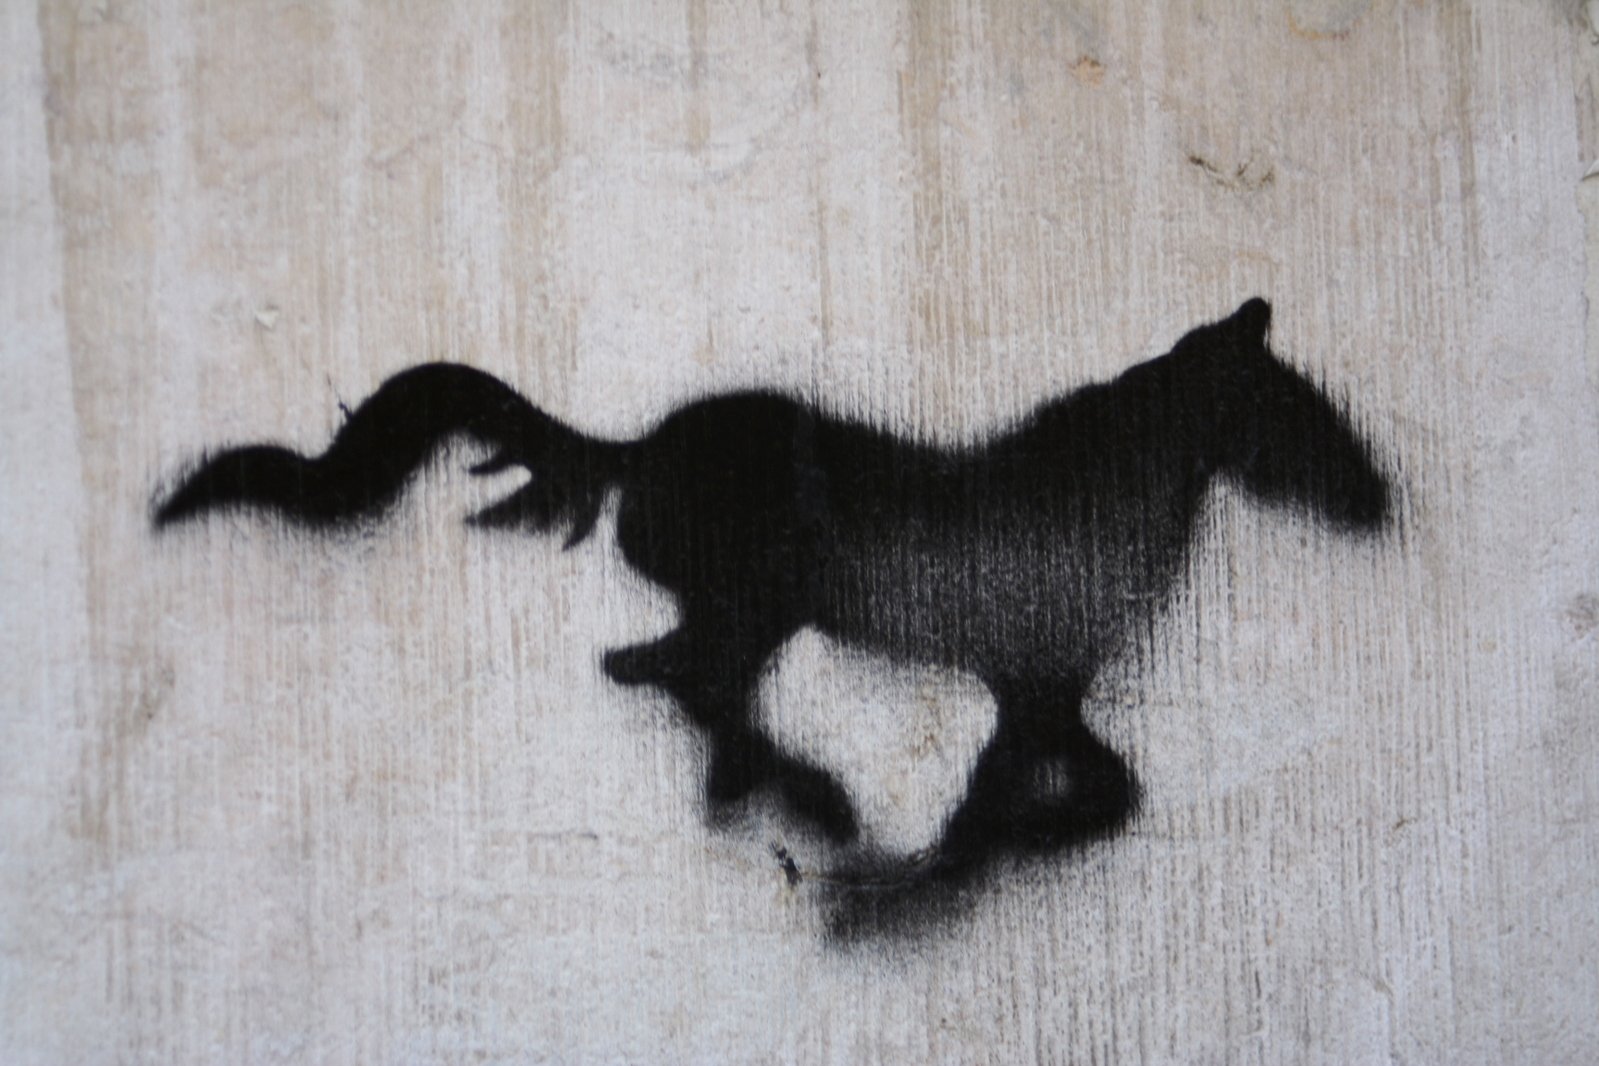 a drawing of a horse is shown on wood